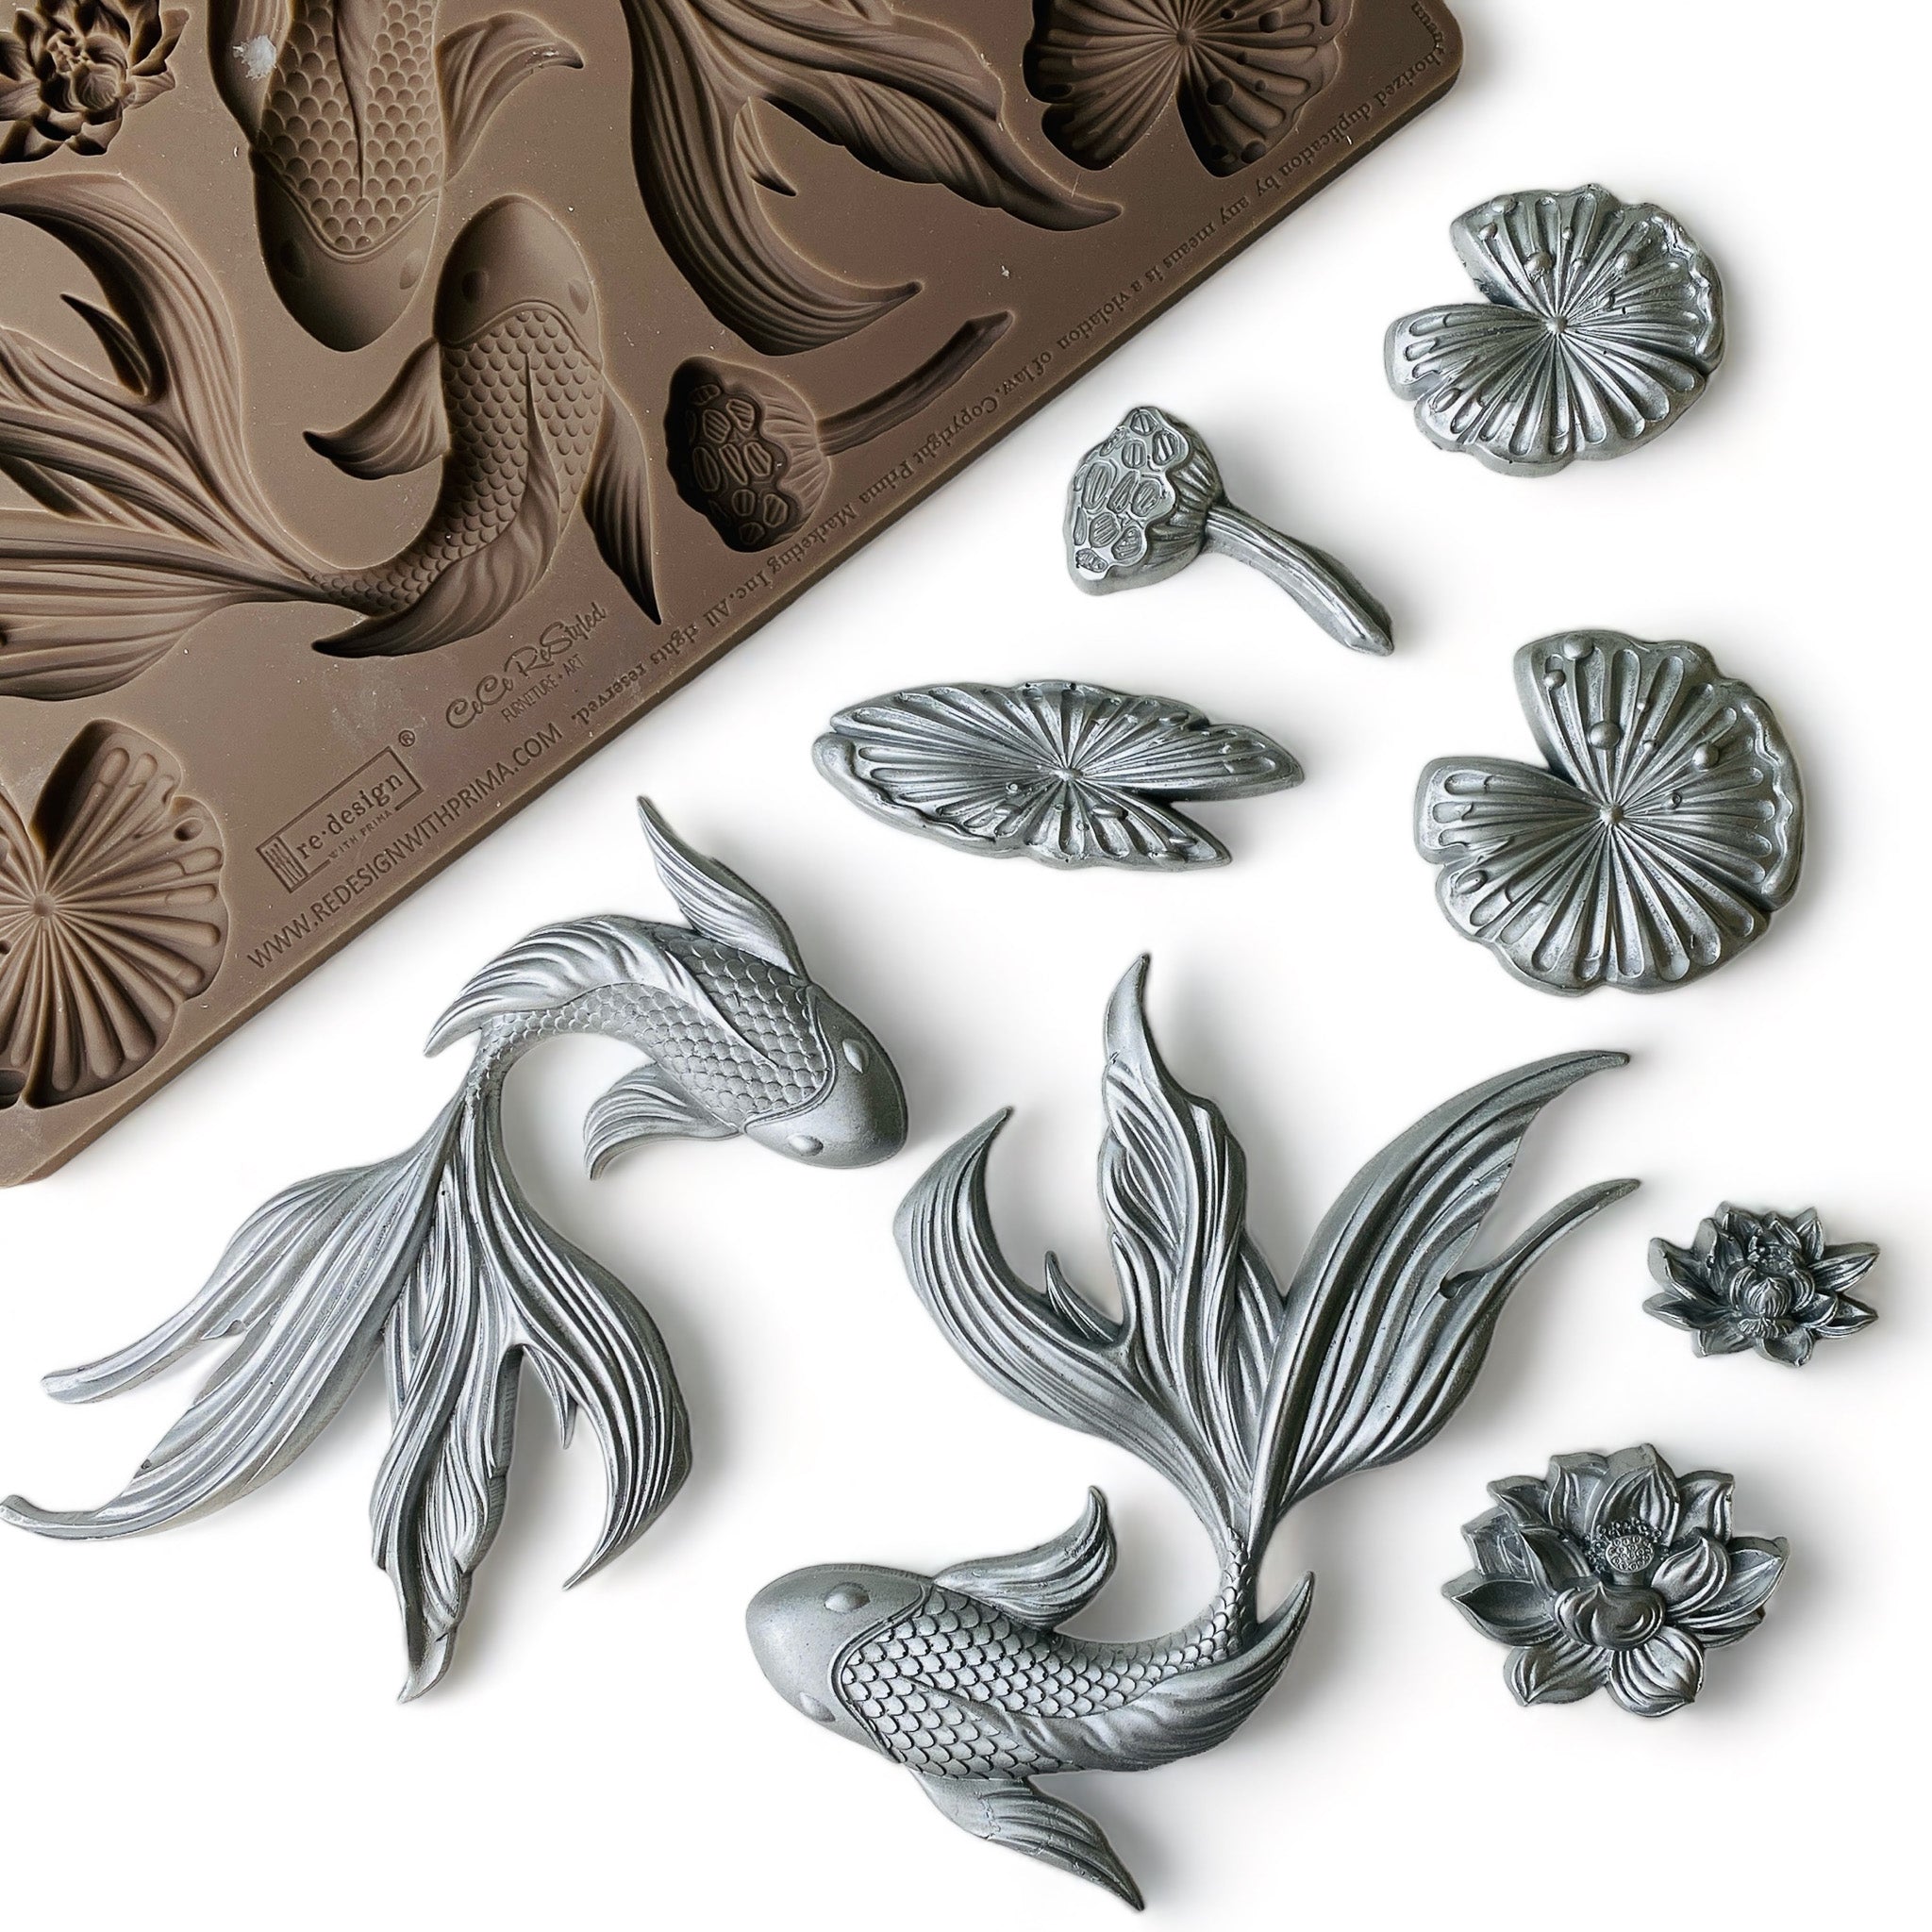 A brown silicone mold and silver-colored castings featuring 2 intricately-detailed koi fish, surrounded by water lilies and lily pads are against a white background.